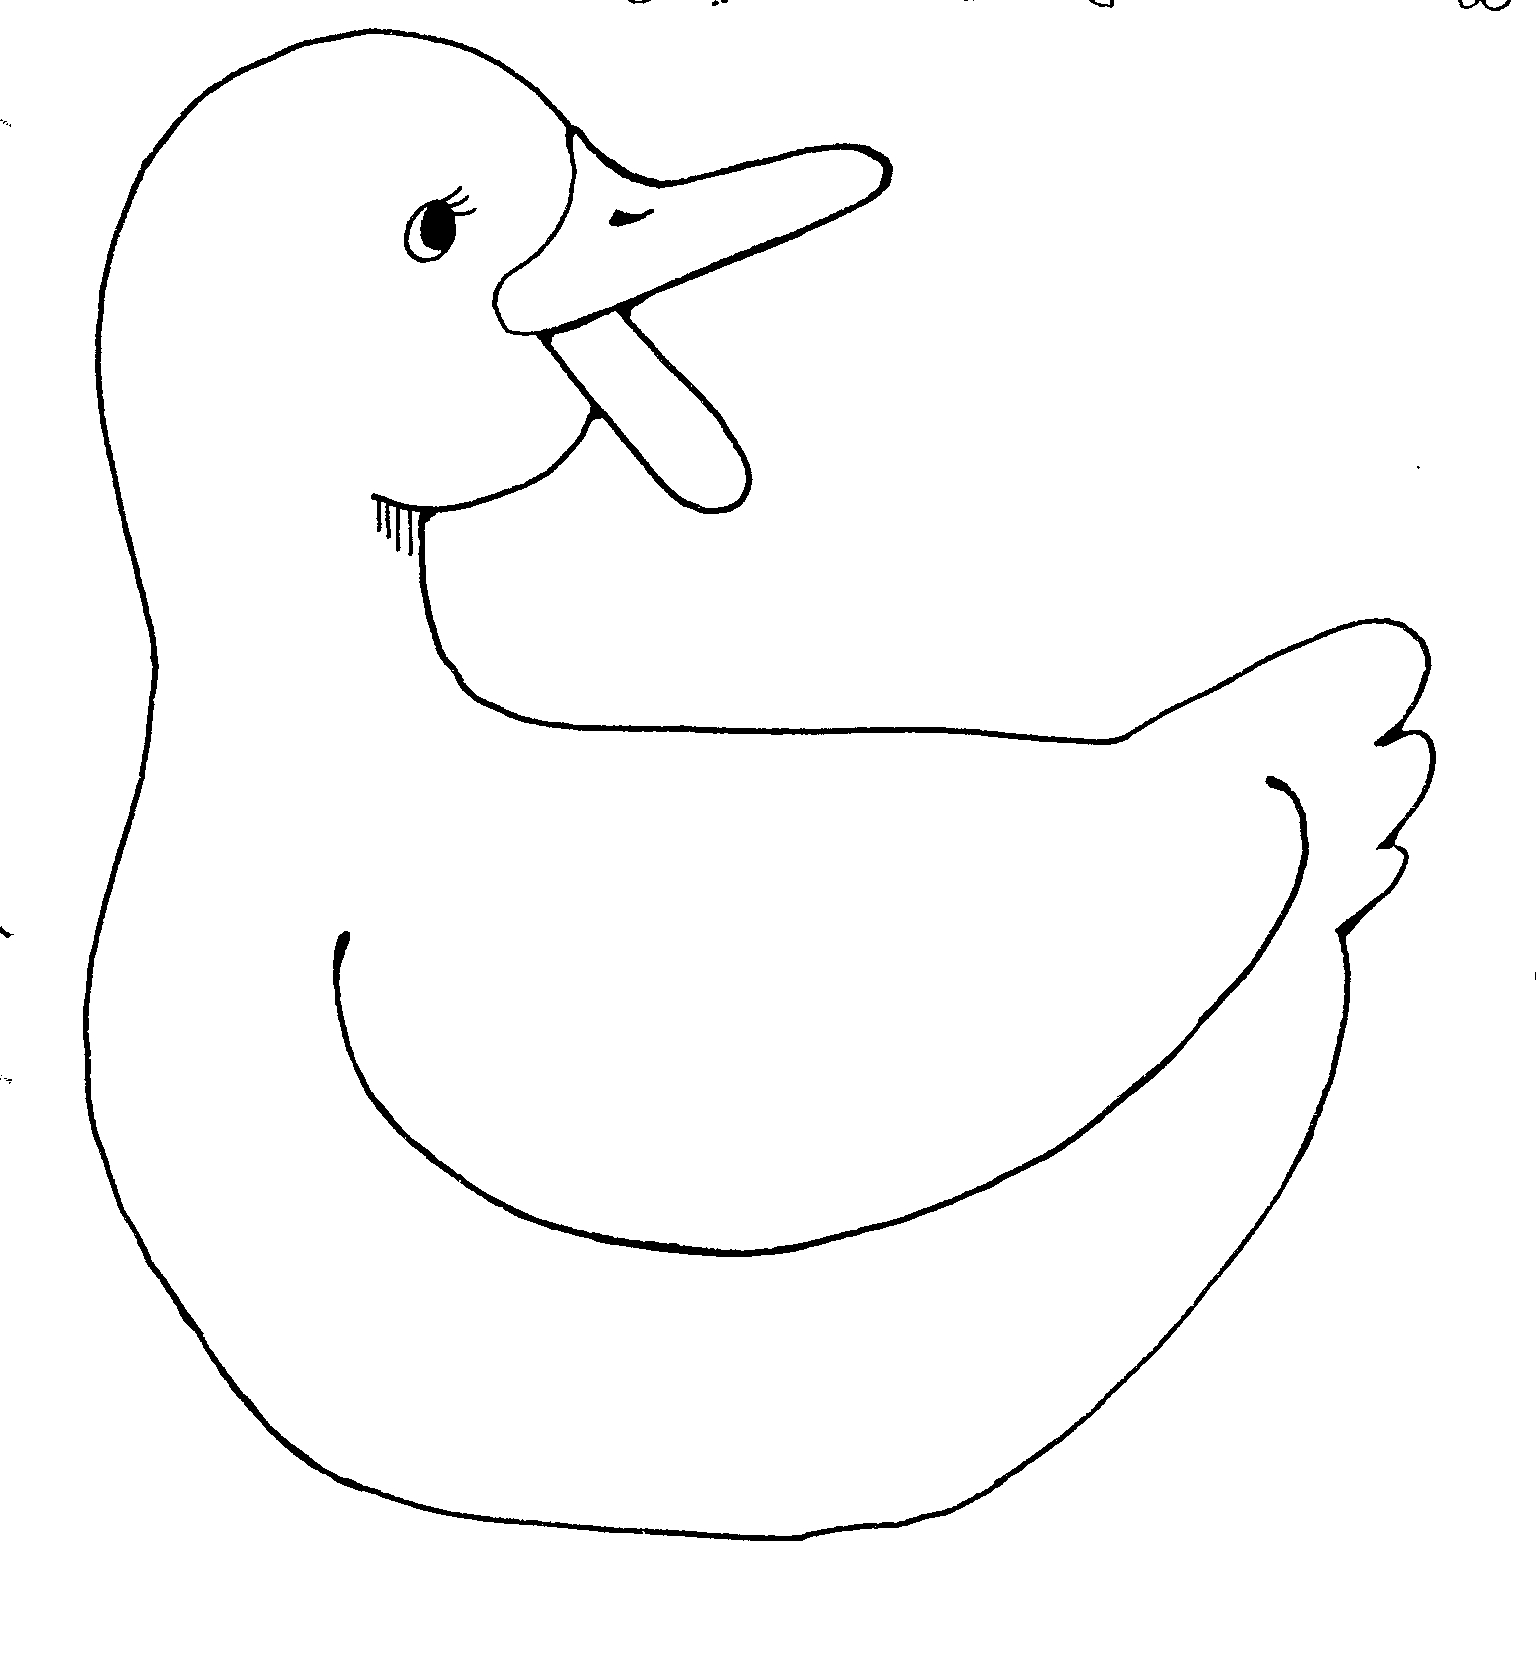 clipart black and white duck - photo #2